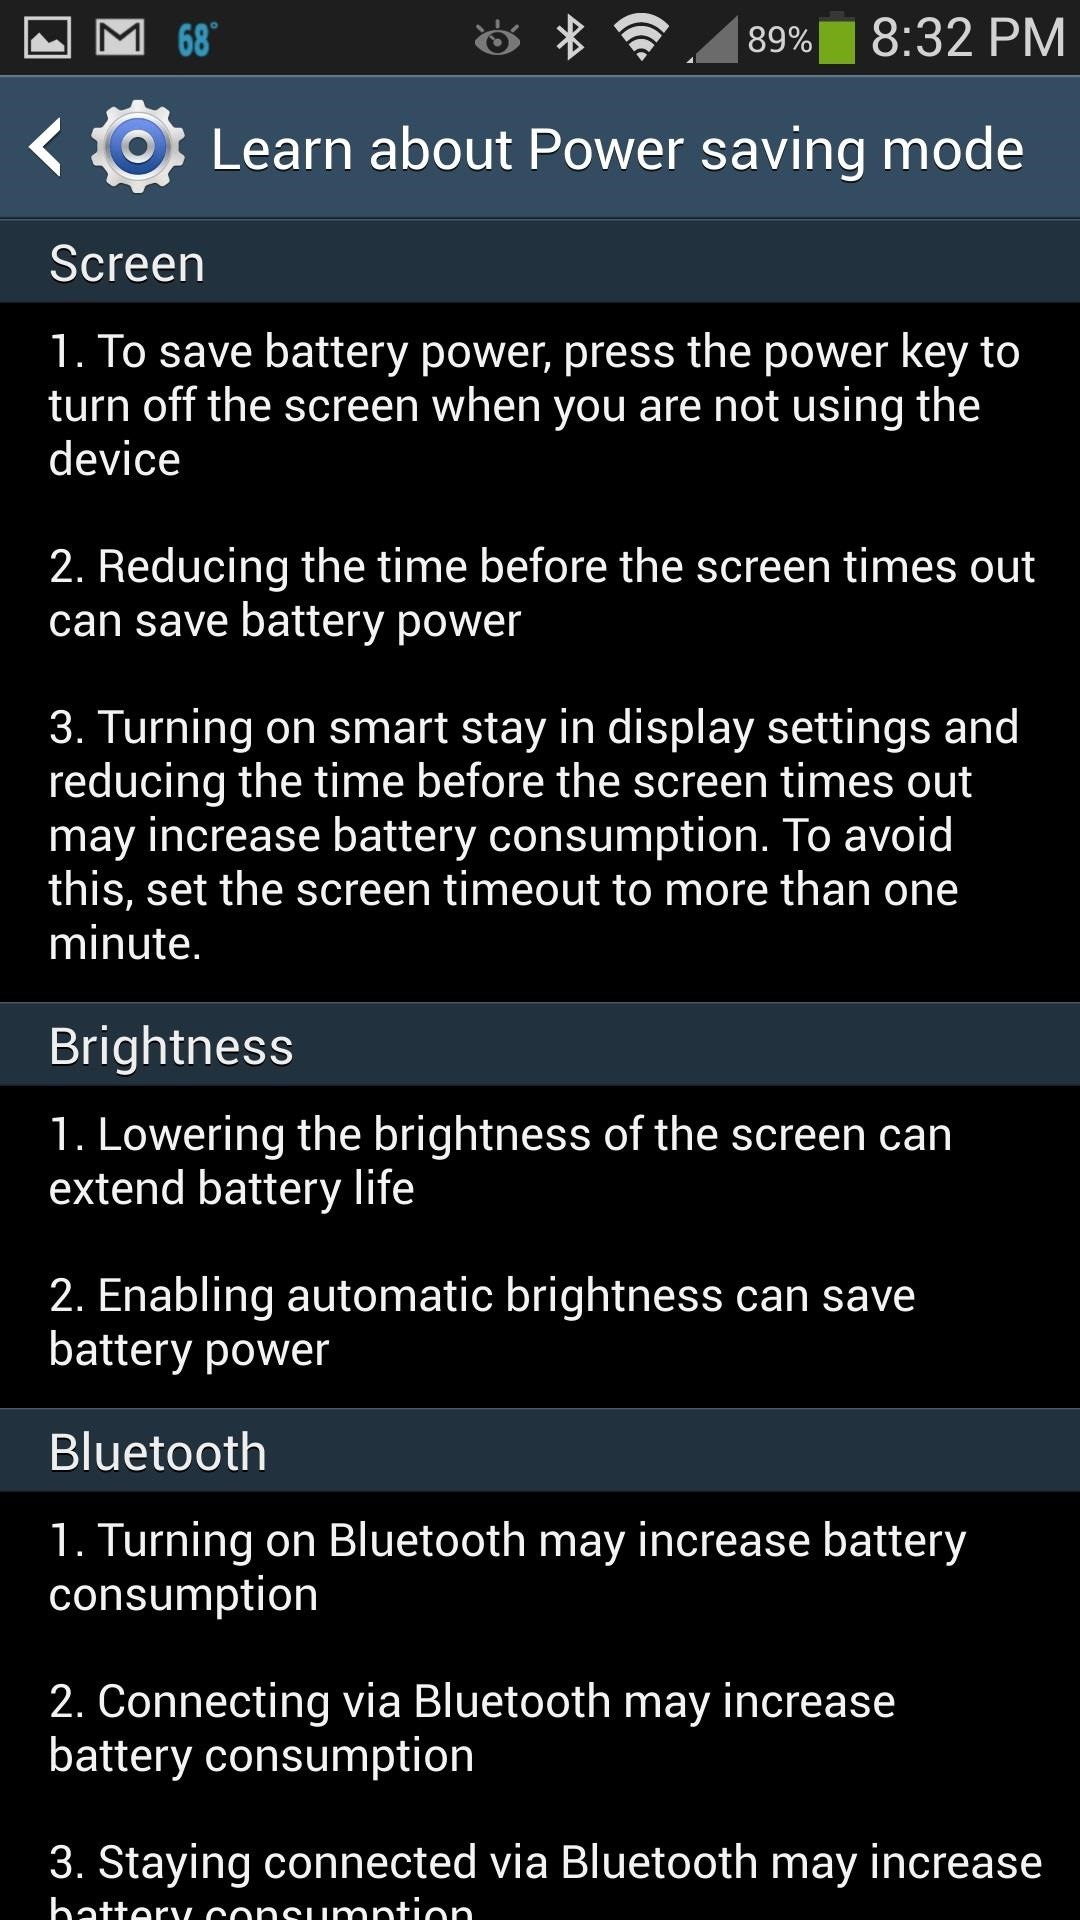 How to Totally Maximize the Battery Life of Your Samsung Galaxy S4